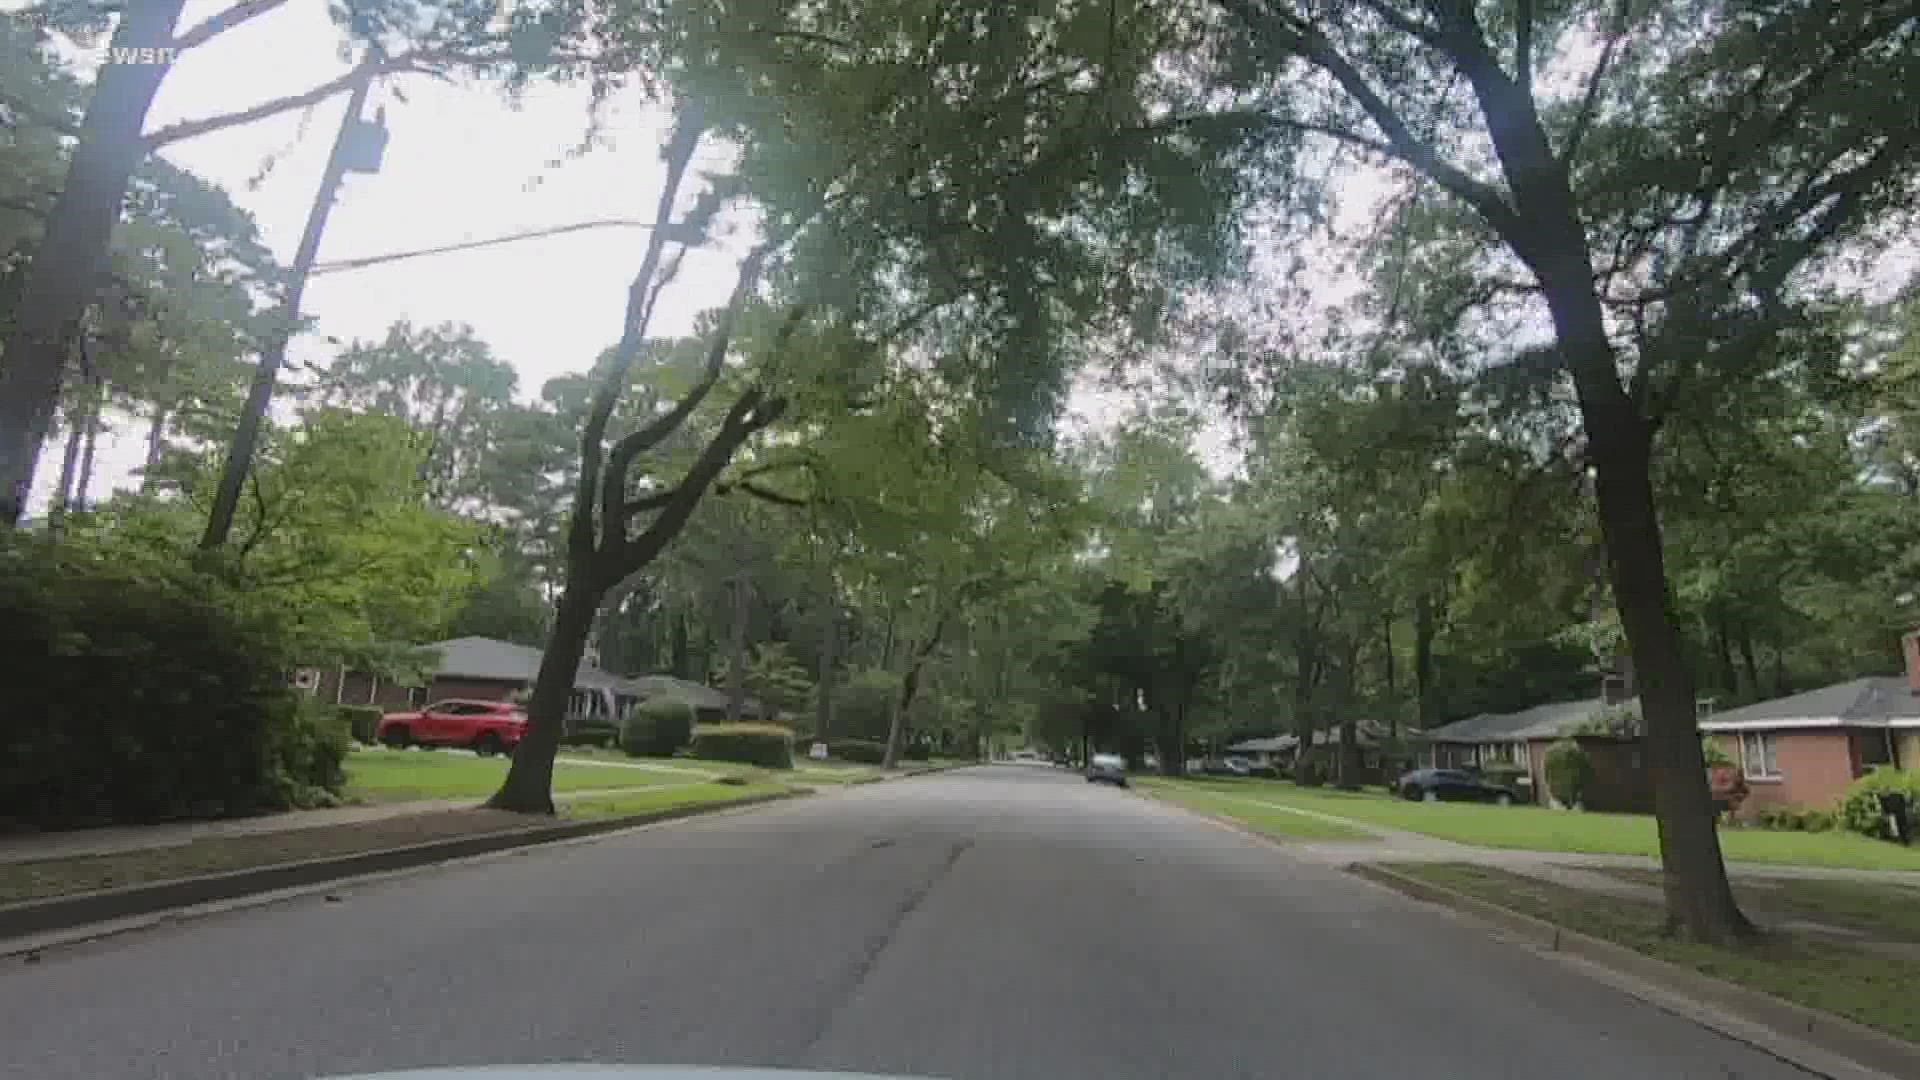 Some locals said they are dealing with a rise in thieves stealing cars or taking things out of them. A Norfolk civic league shared part of its plan to combat crime.